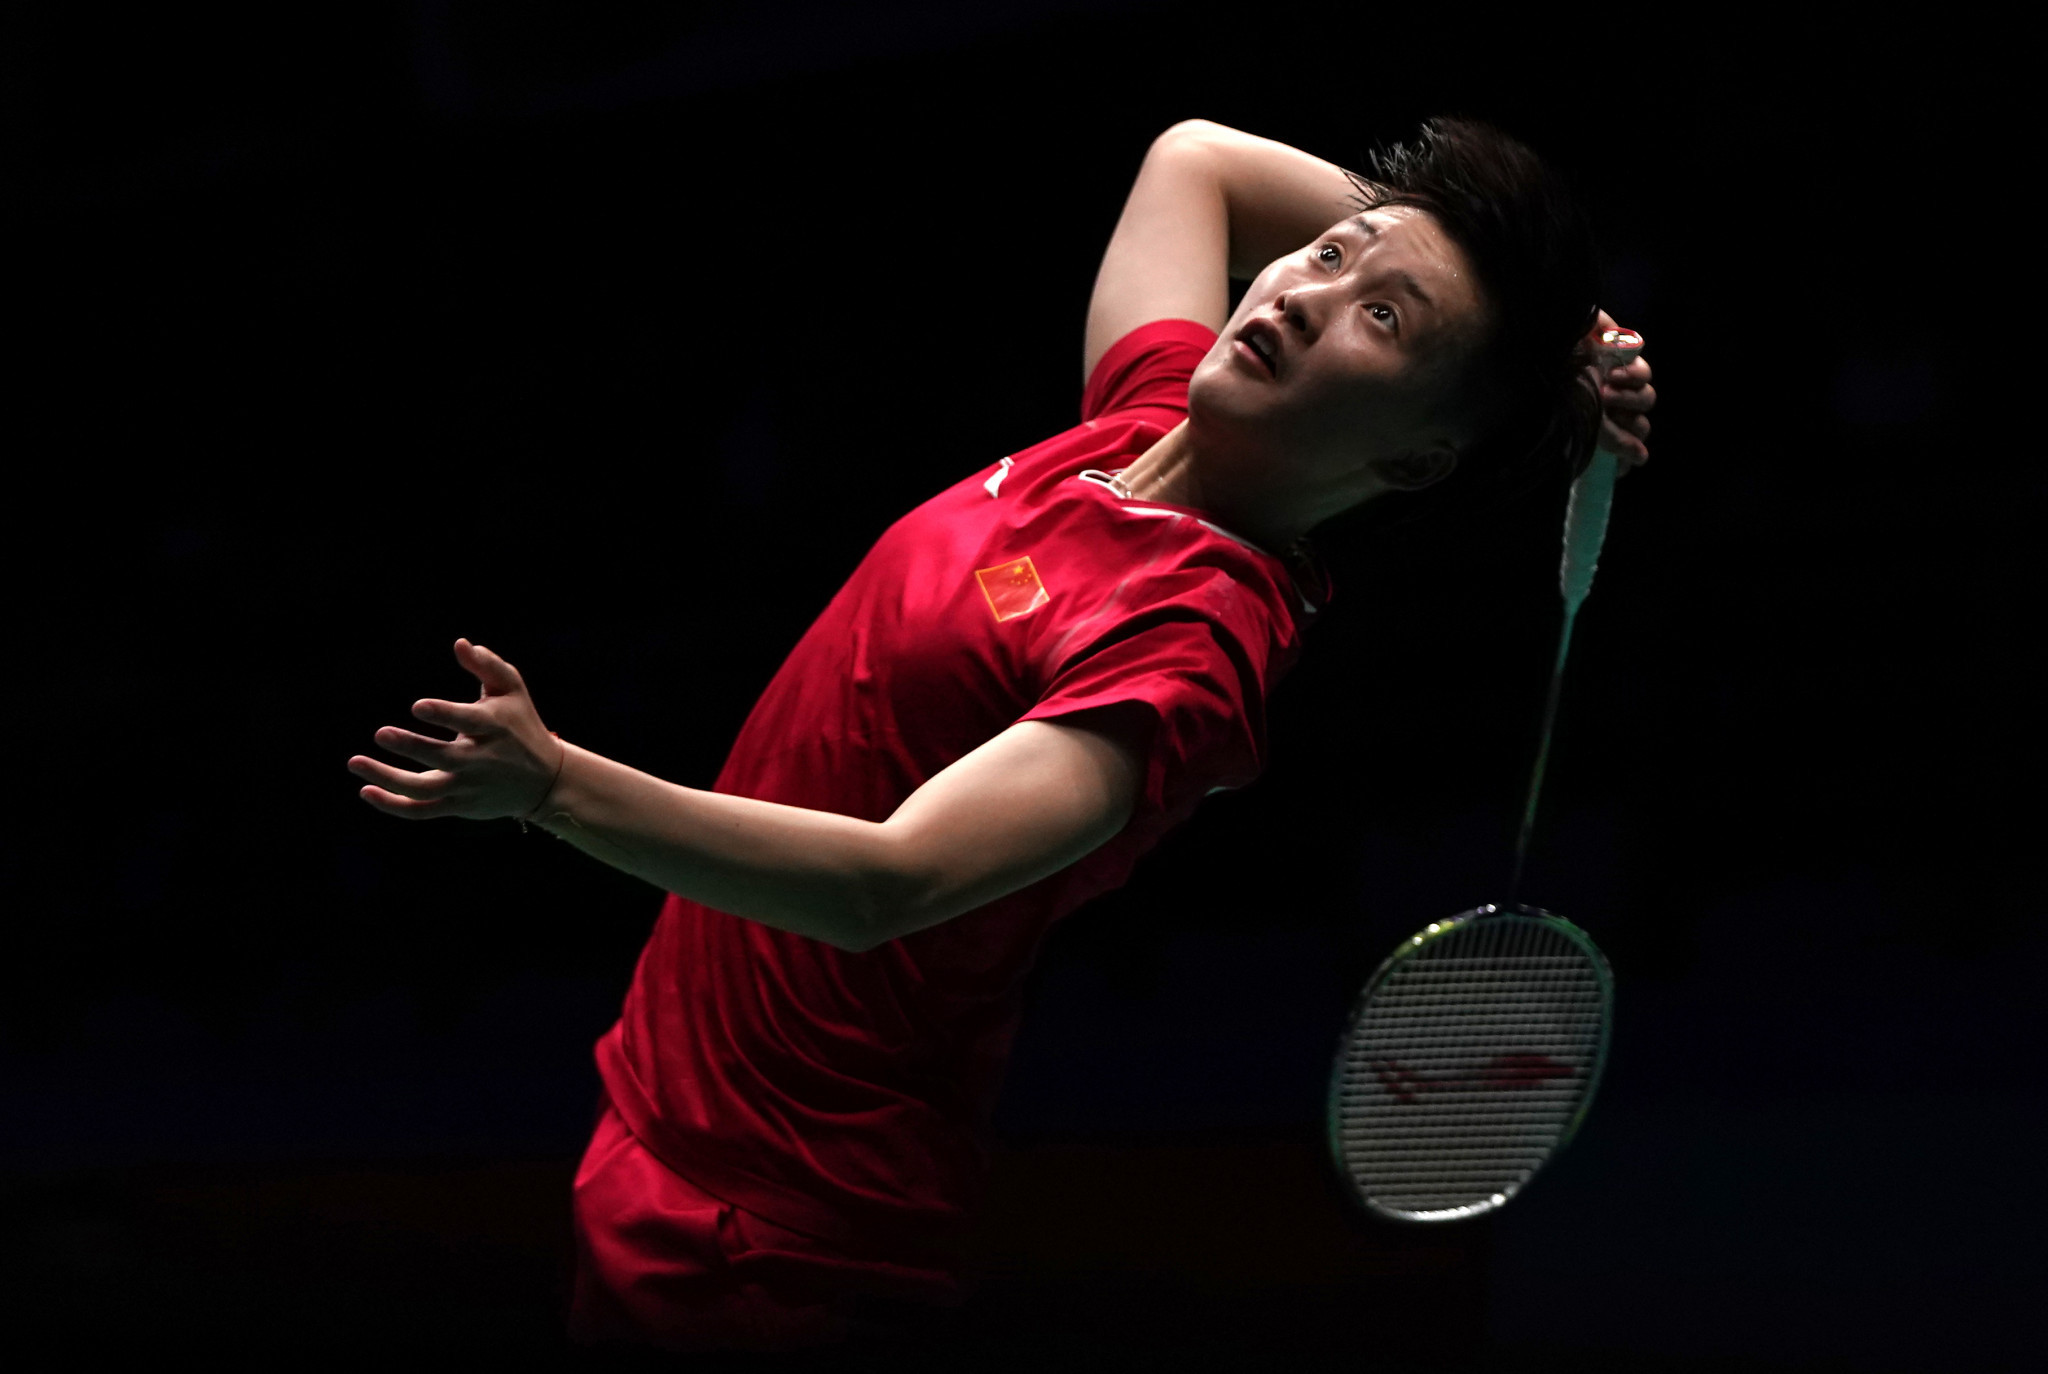 Chen Yufei, the top seed in the women's draw, cruised into the semi-finals in Wuhan ©Getty Images